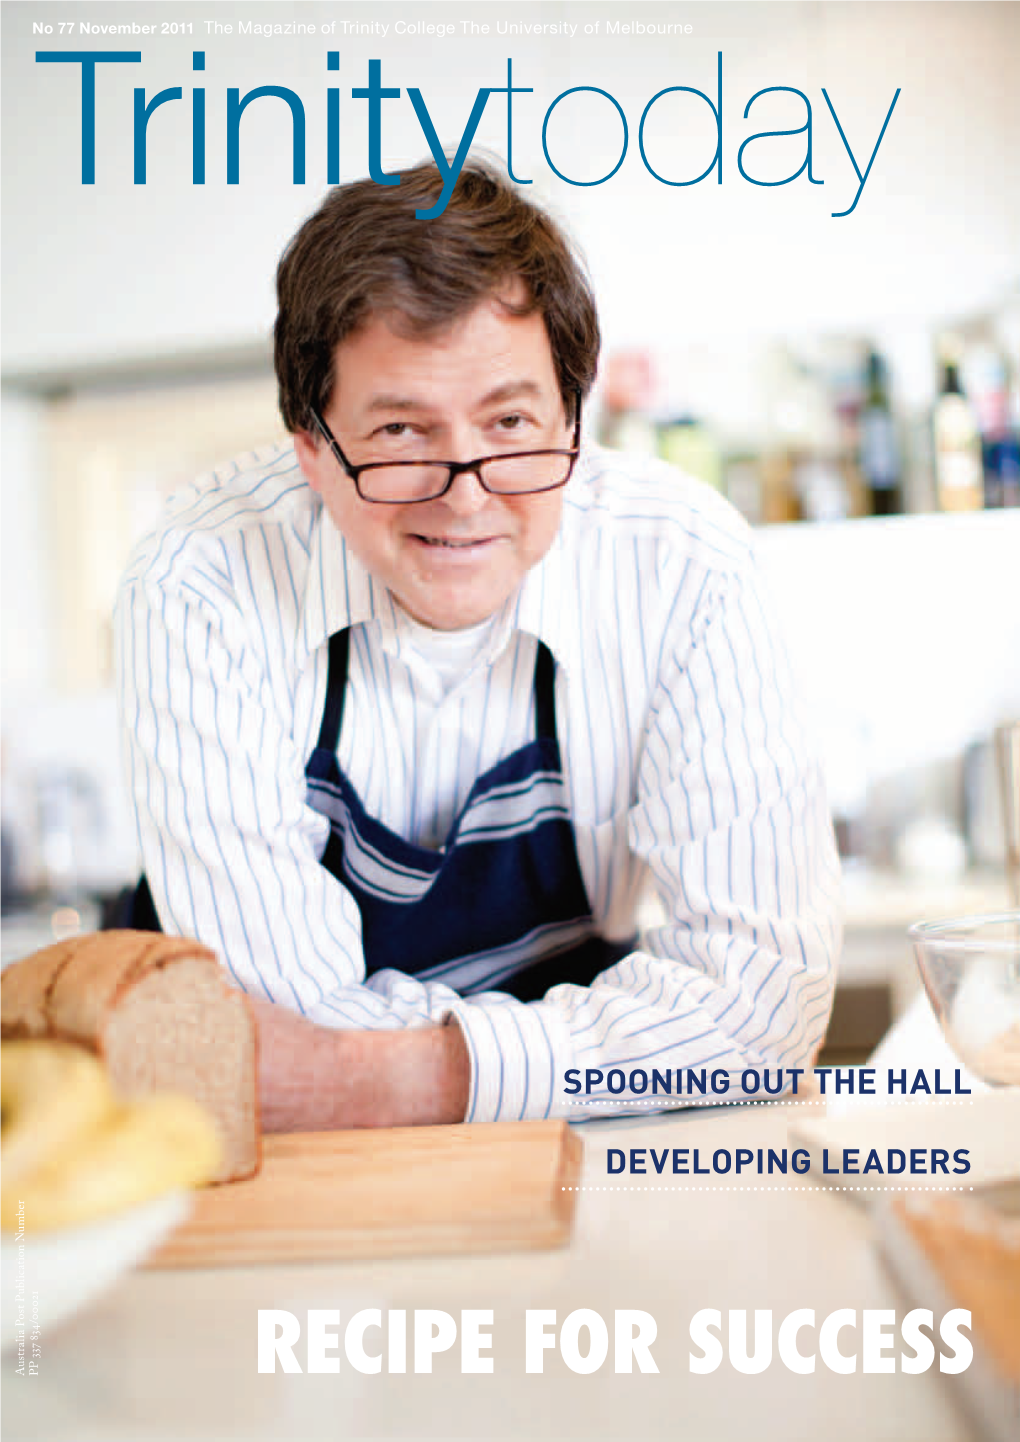 RECIPE for SUCCESS 8 on the Cover Warden Andrew Mcgowan Is a Leader with Remarkable Intellect and Humanity